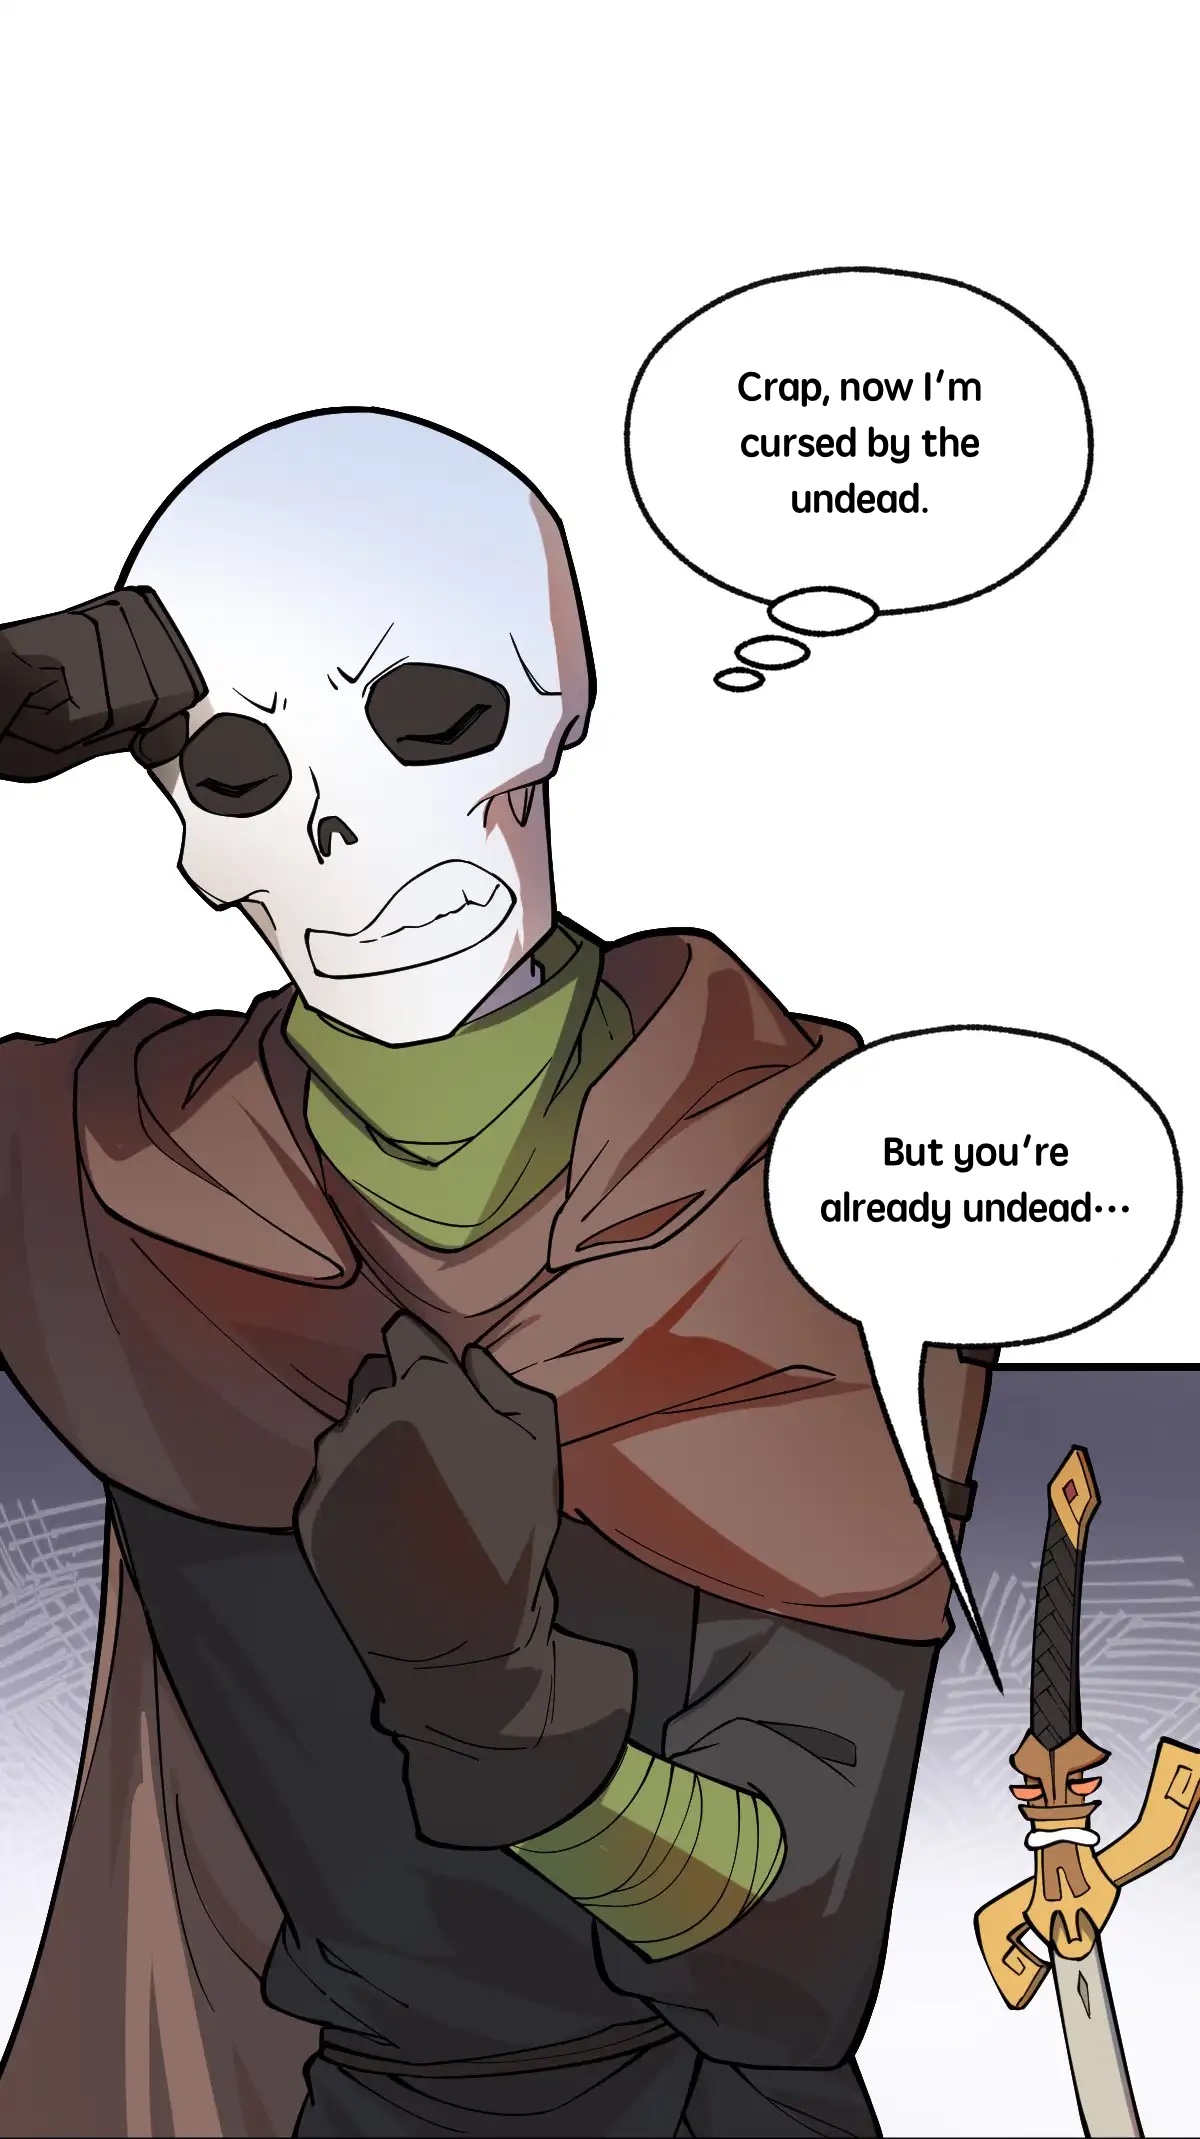 Little Skeleton Ch. 15 Just how romantic is an undead monster?